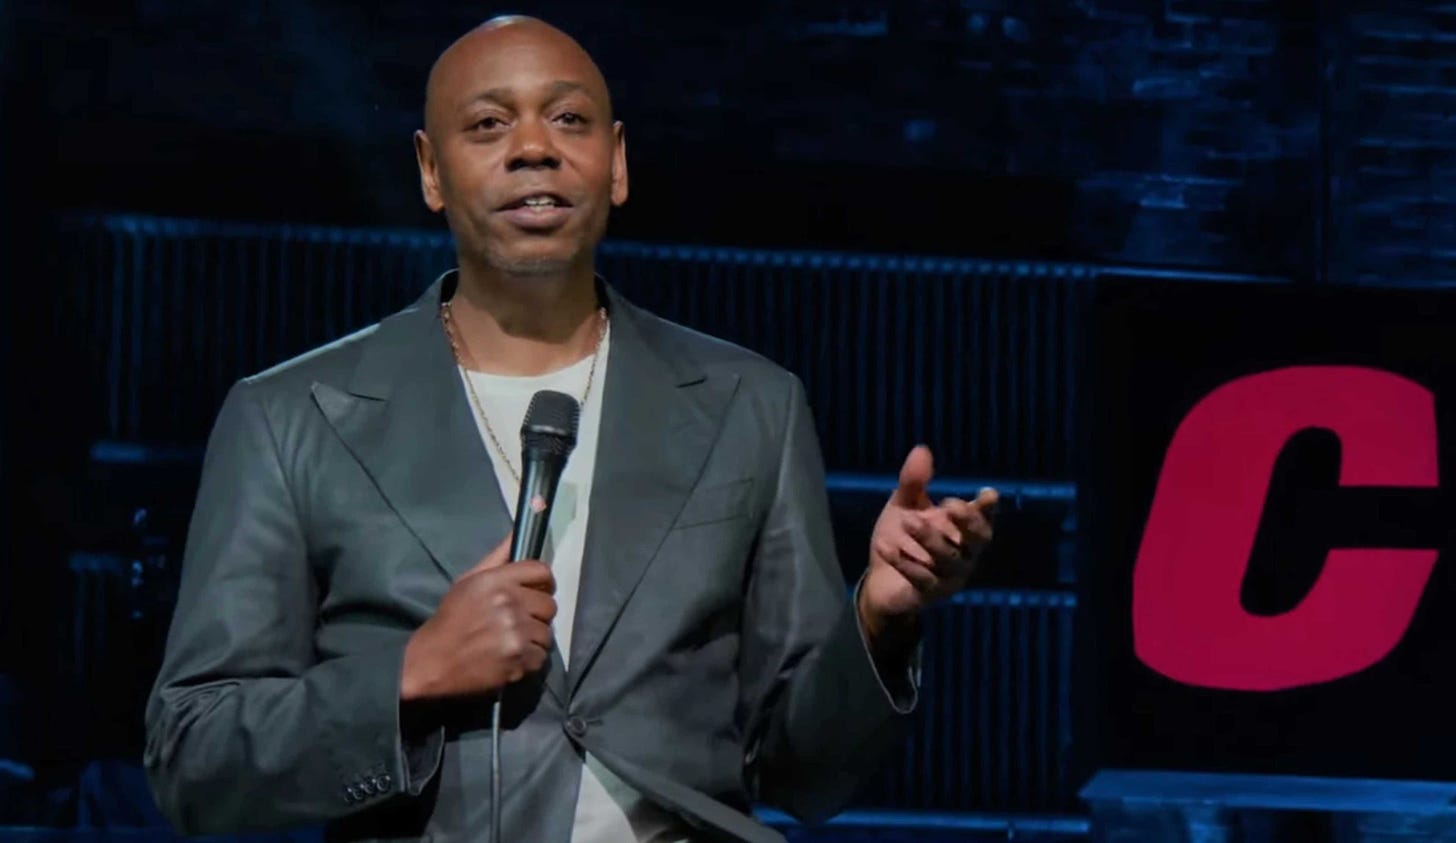 Dave-Chappelle-The-Closer-Promo-2